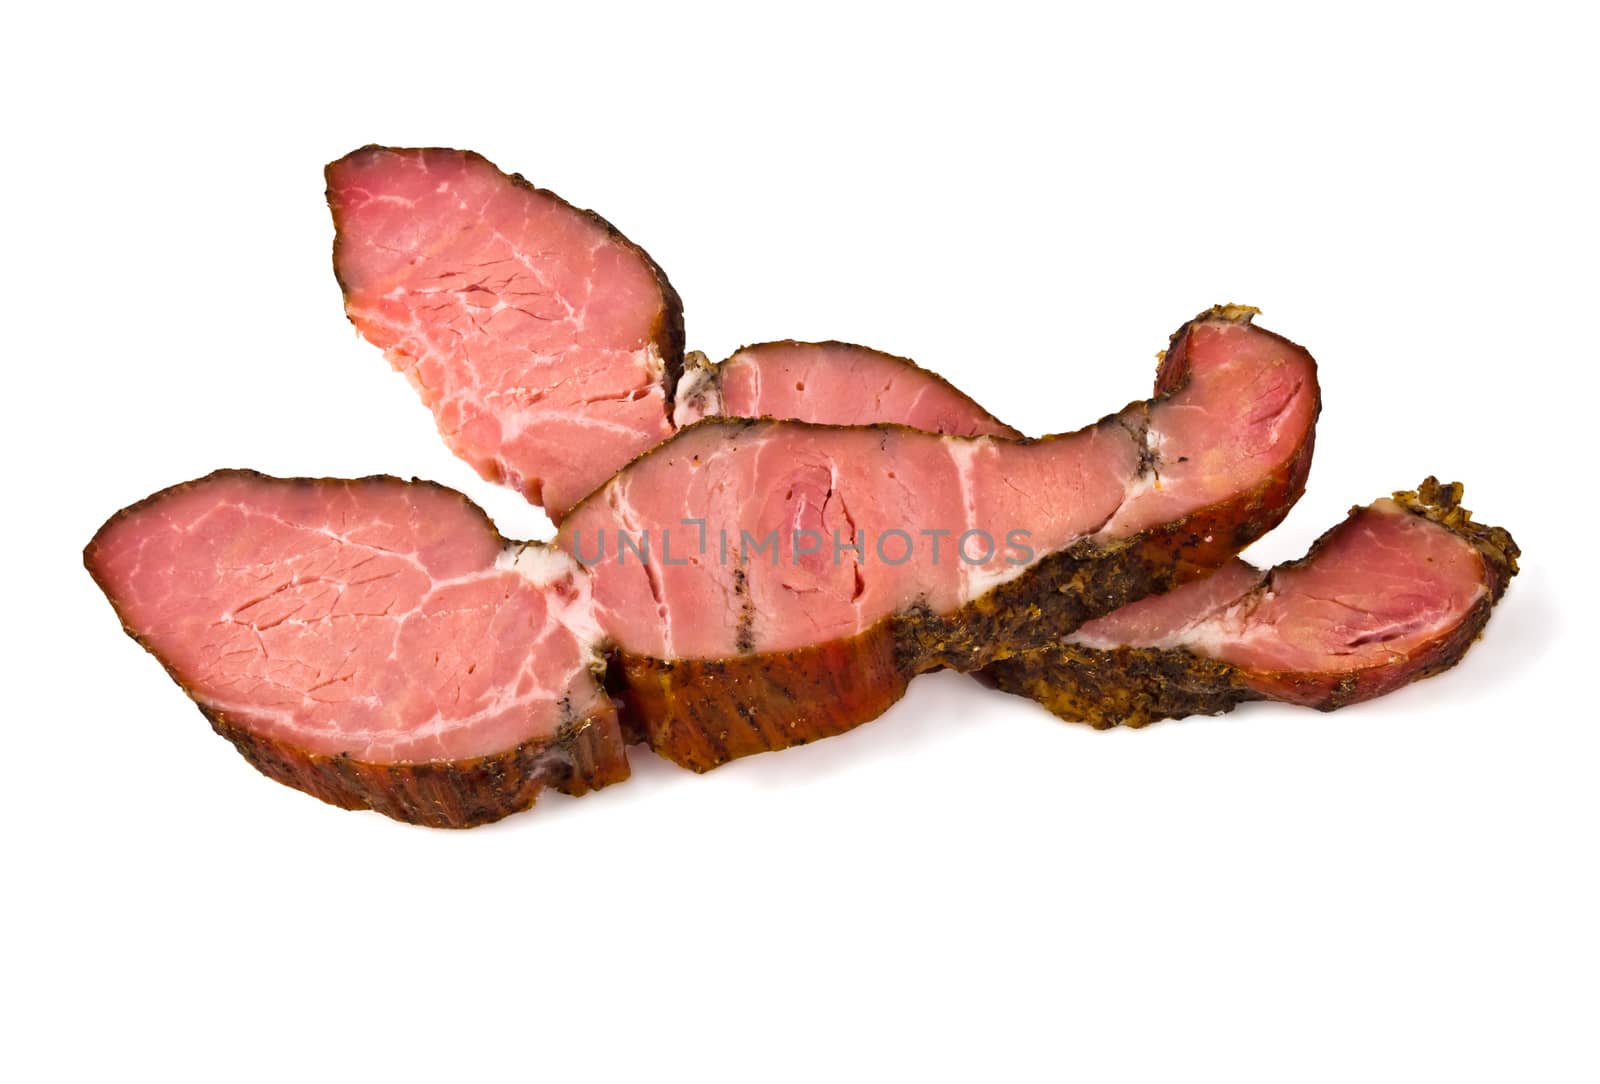 Two pieces of smoked meat on a white background